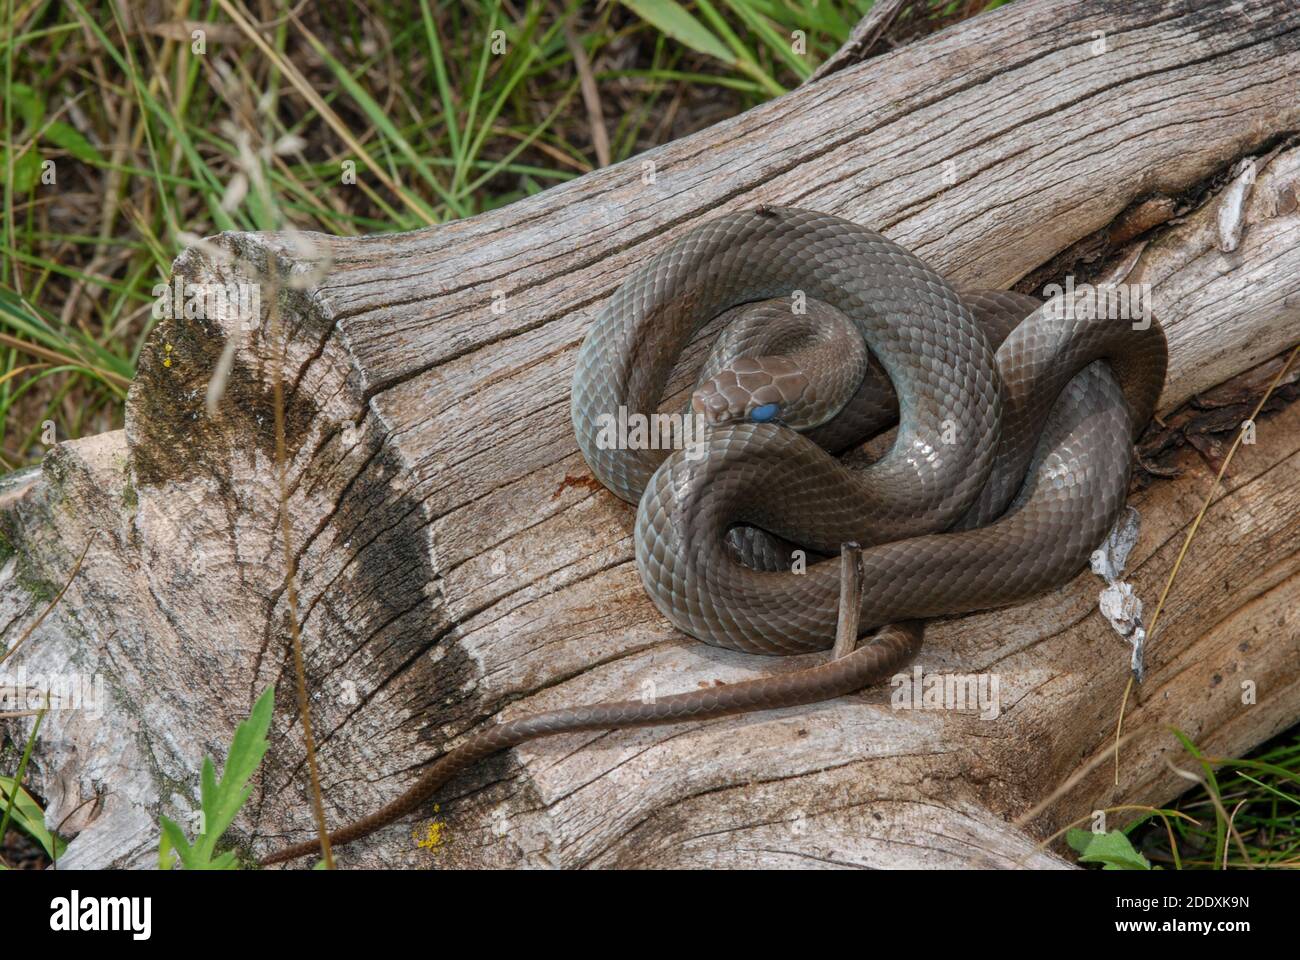 The blue racer (Coluber constrictor foxii) a harmless colubrid snake species found in Wisconsin. Stock Photo